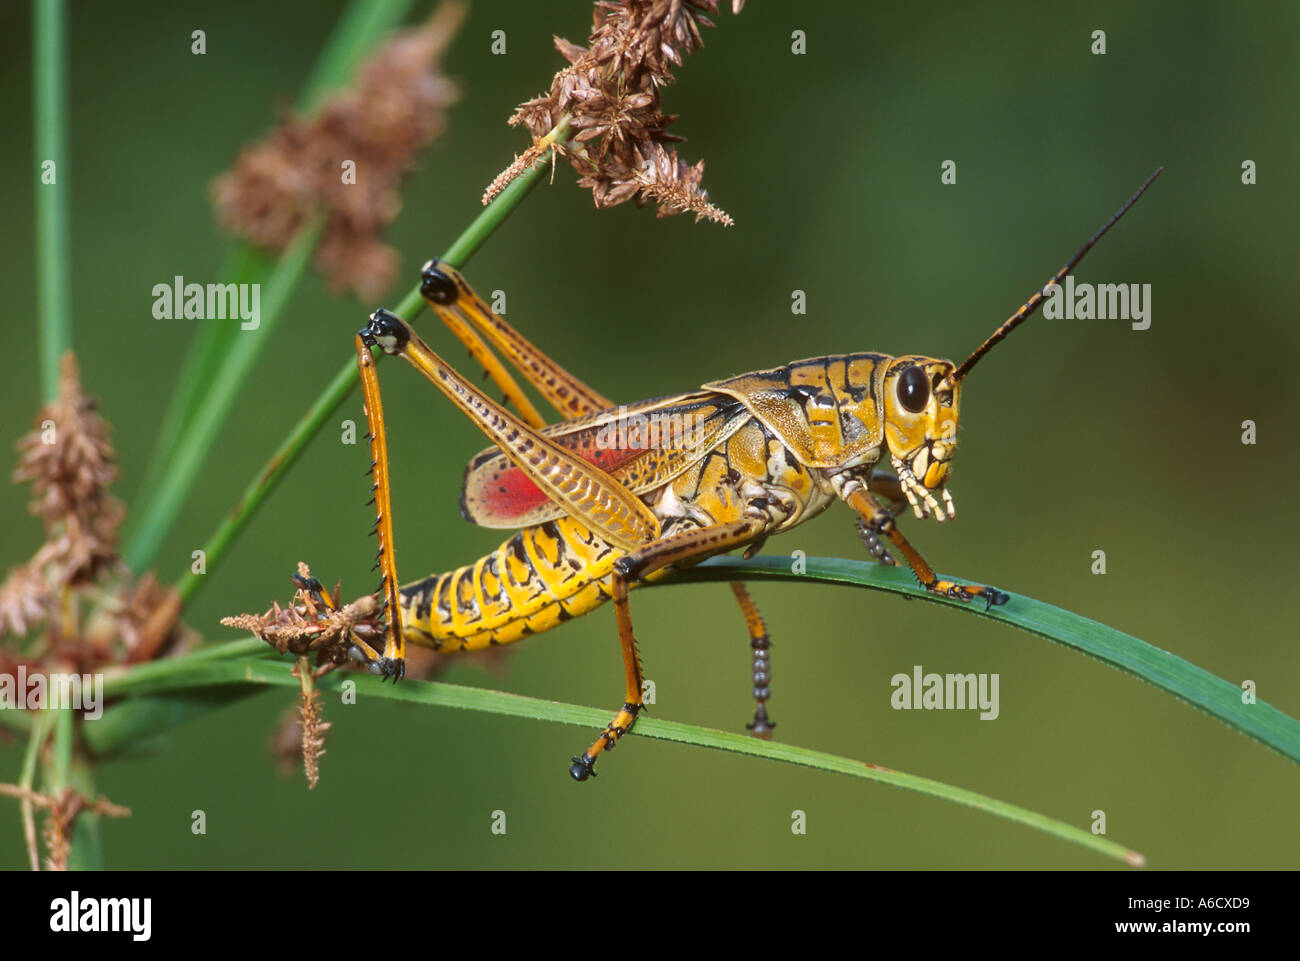 Southeastern lubber grasshopper Romalea microptera insects bugs Stock Photo